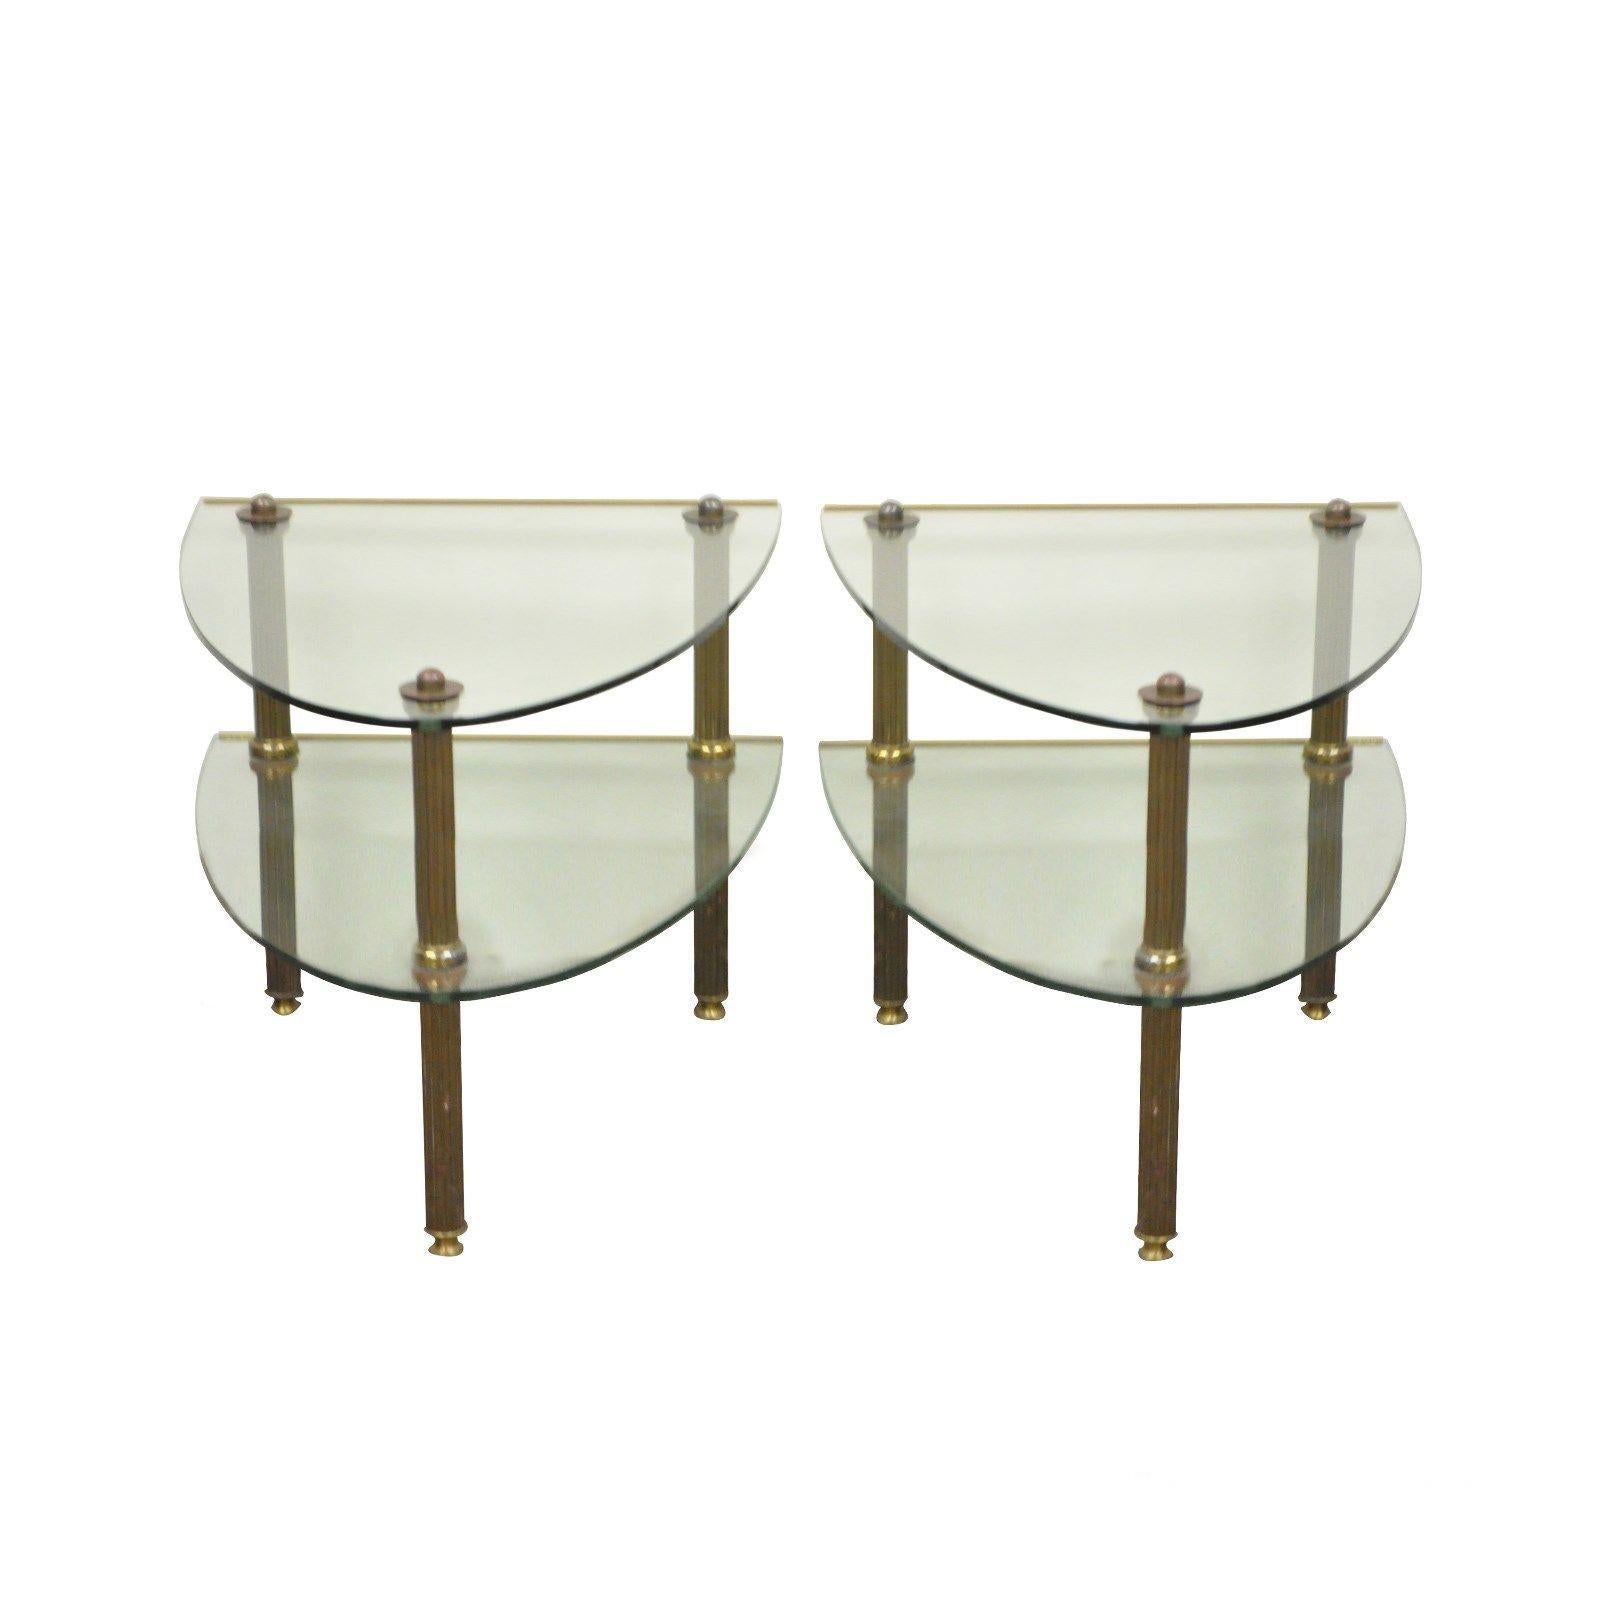 Pair of Hollywood Regency French Style Brass and Glass Two-Tier Side Tables